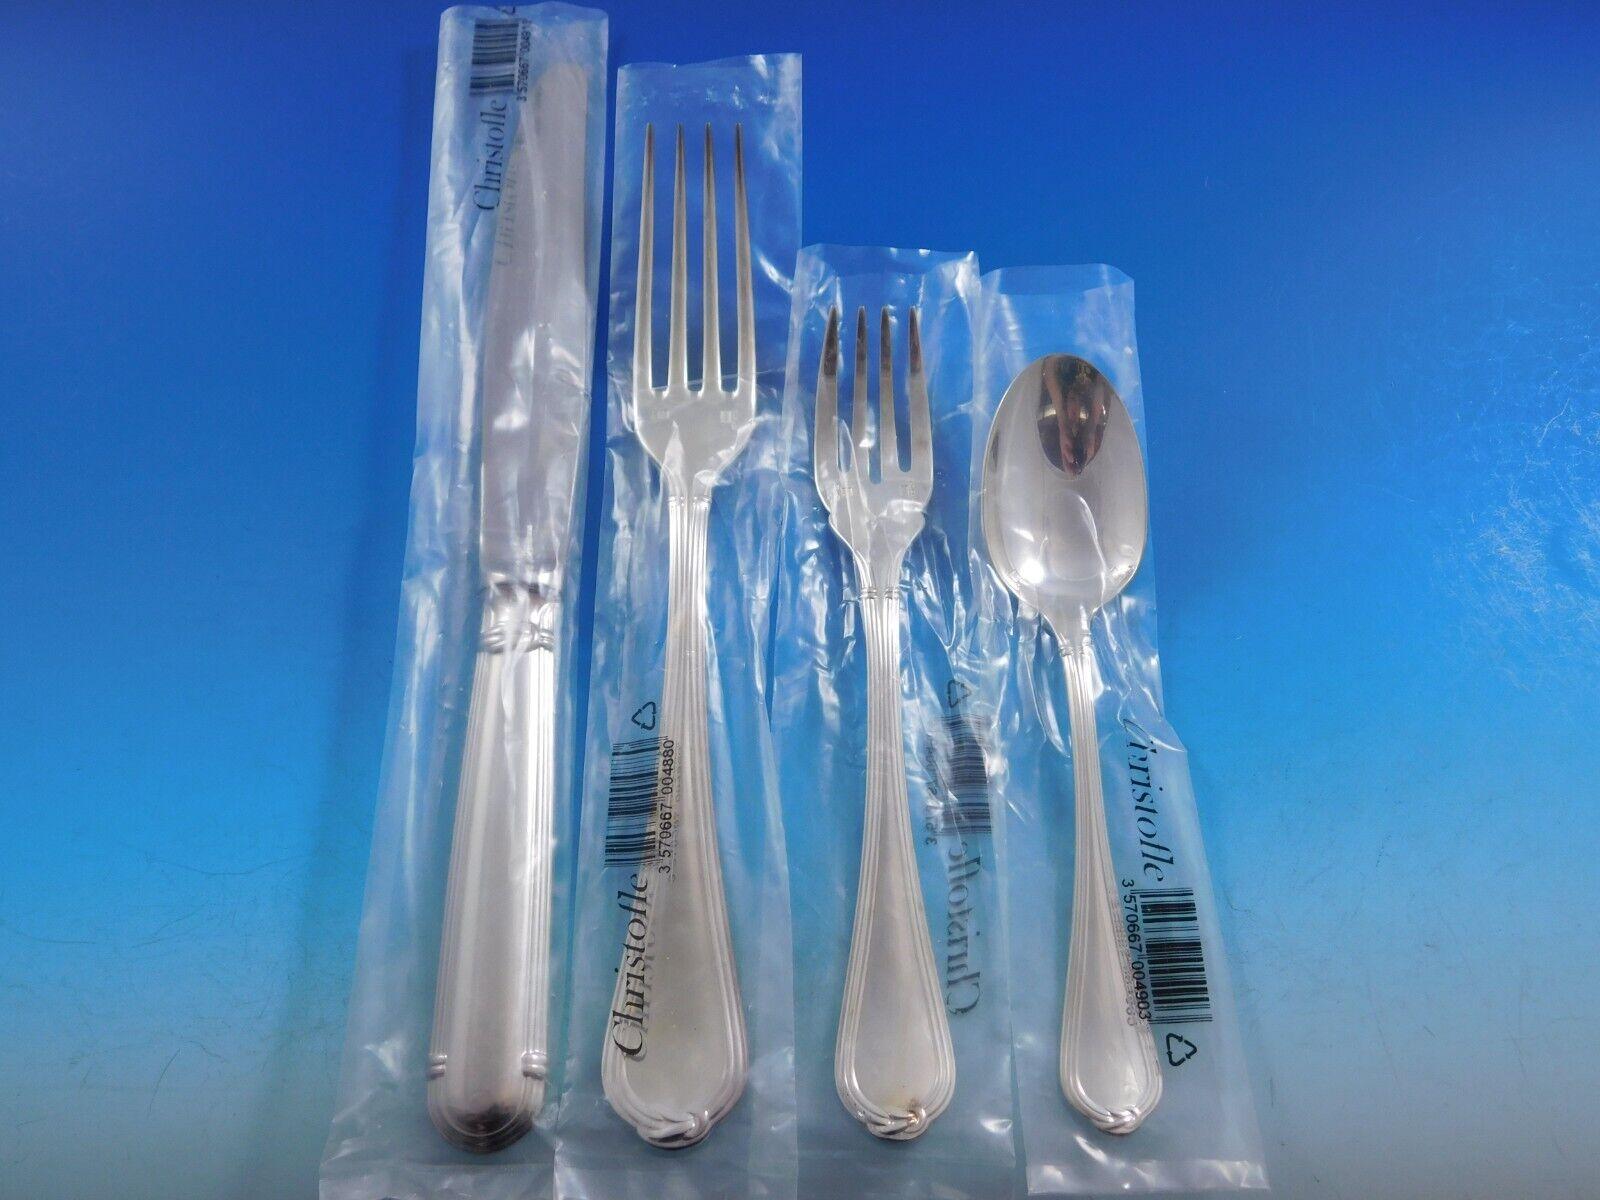 Dinner Size Oceana by Christofle France Silverplated Flatware set - 30 pieces. This set includes:

6 Dinner Knives, 9 3/4